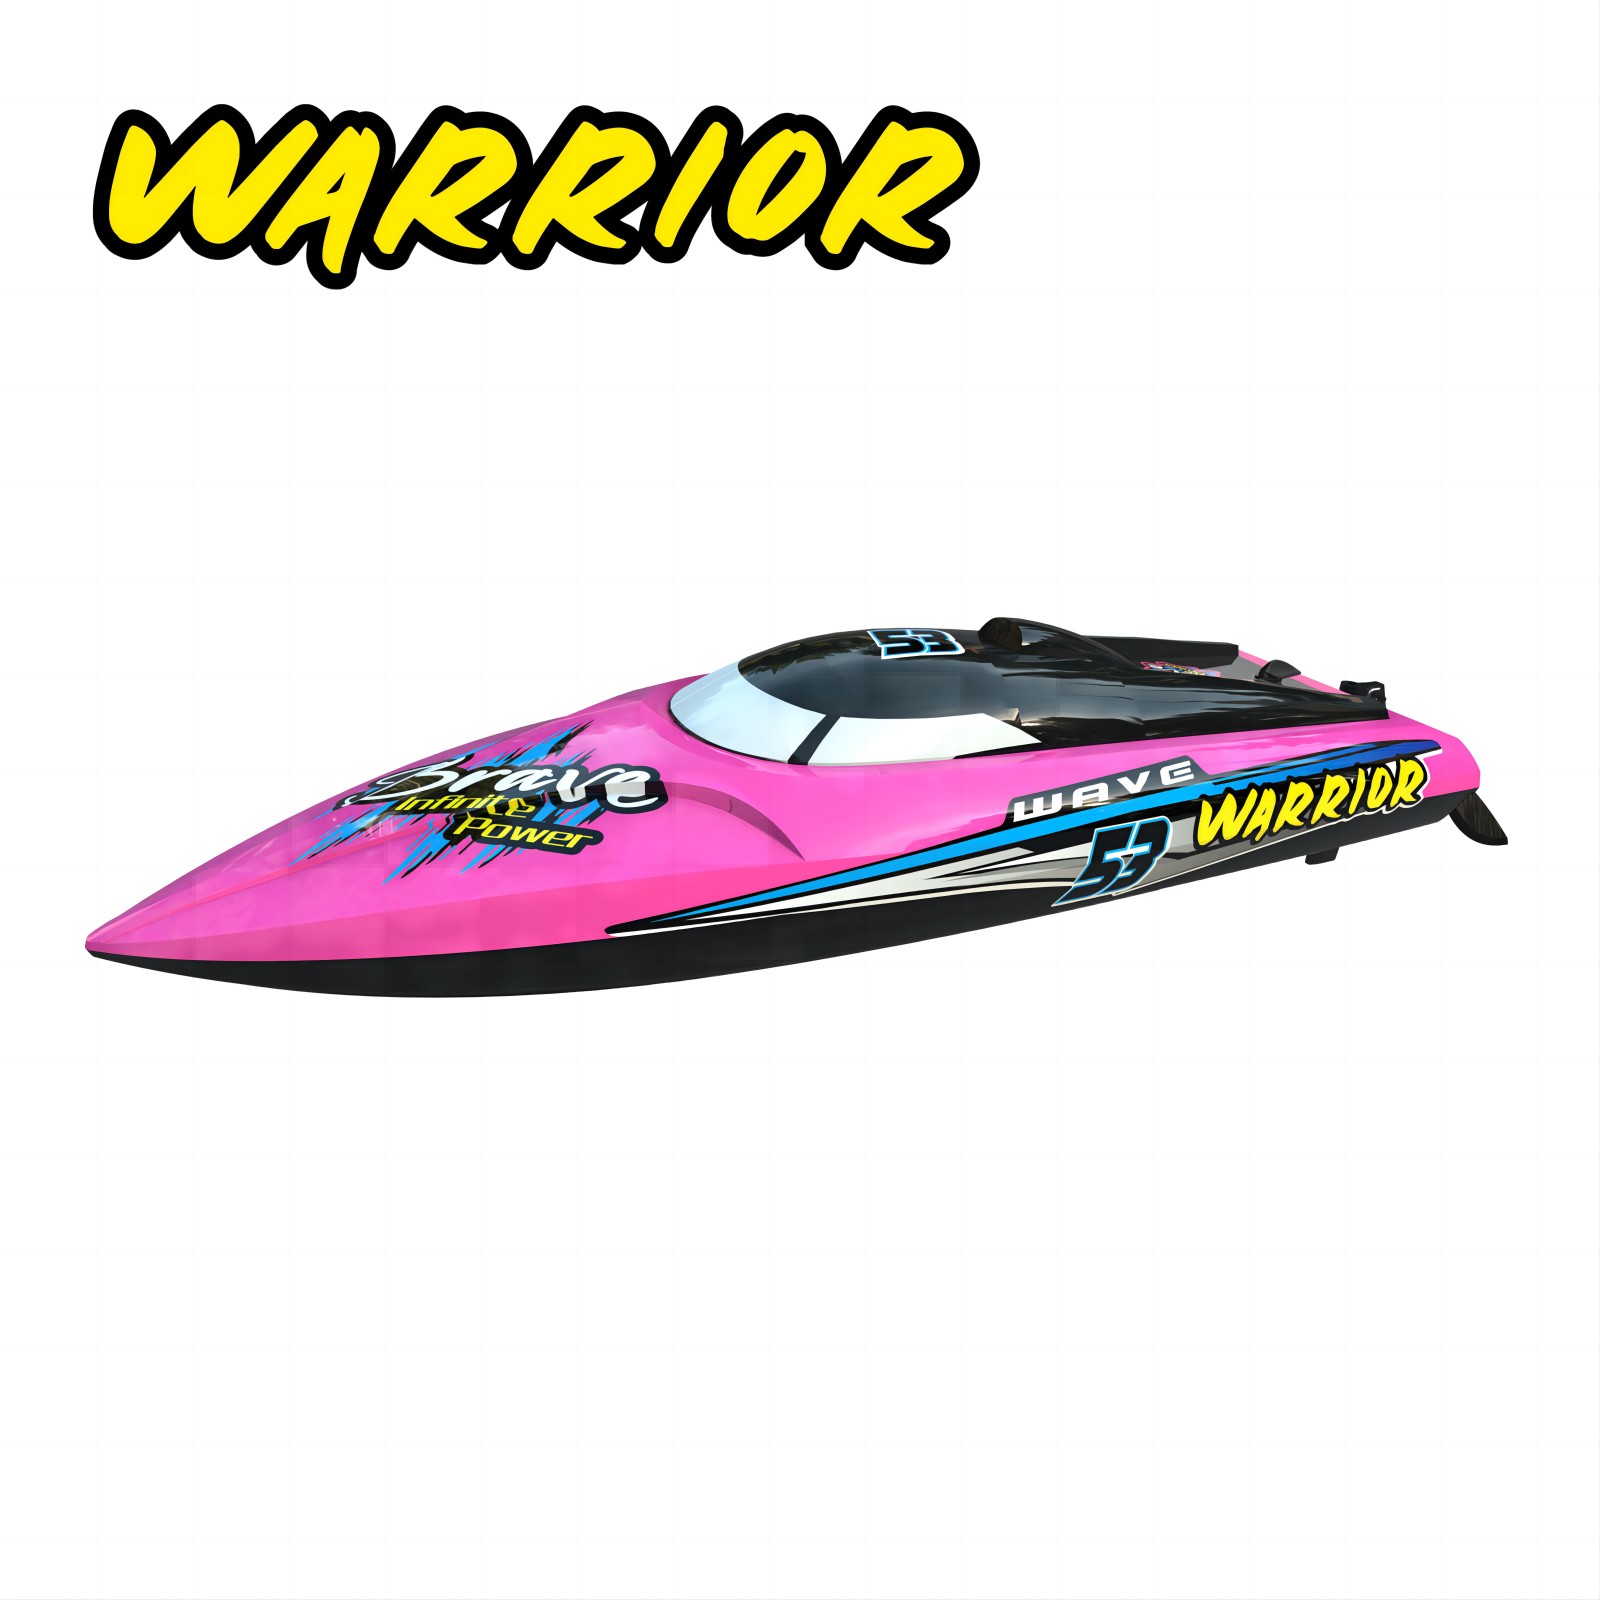 Warrior V4 RTR Small RC Speed Boat